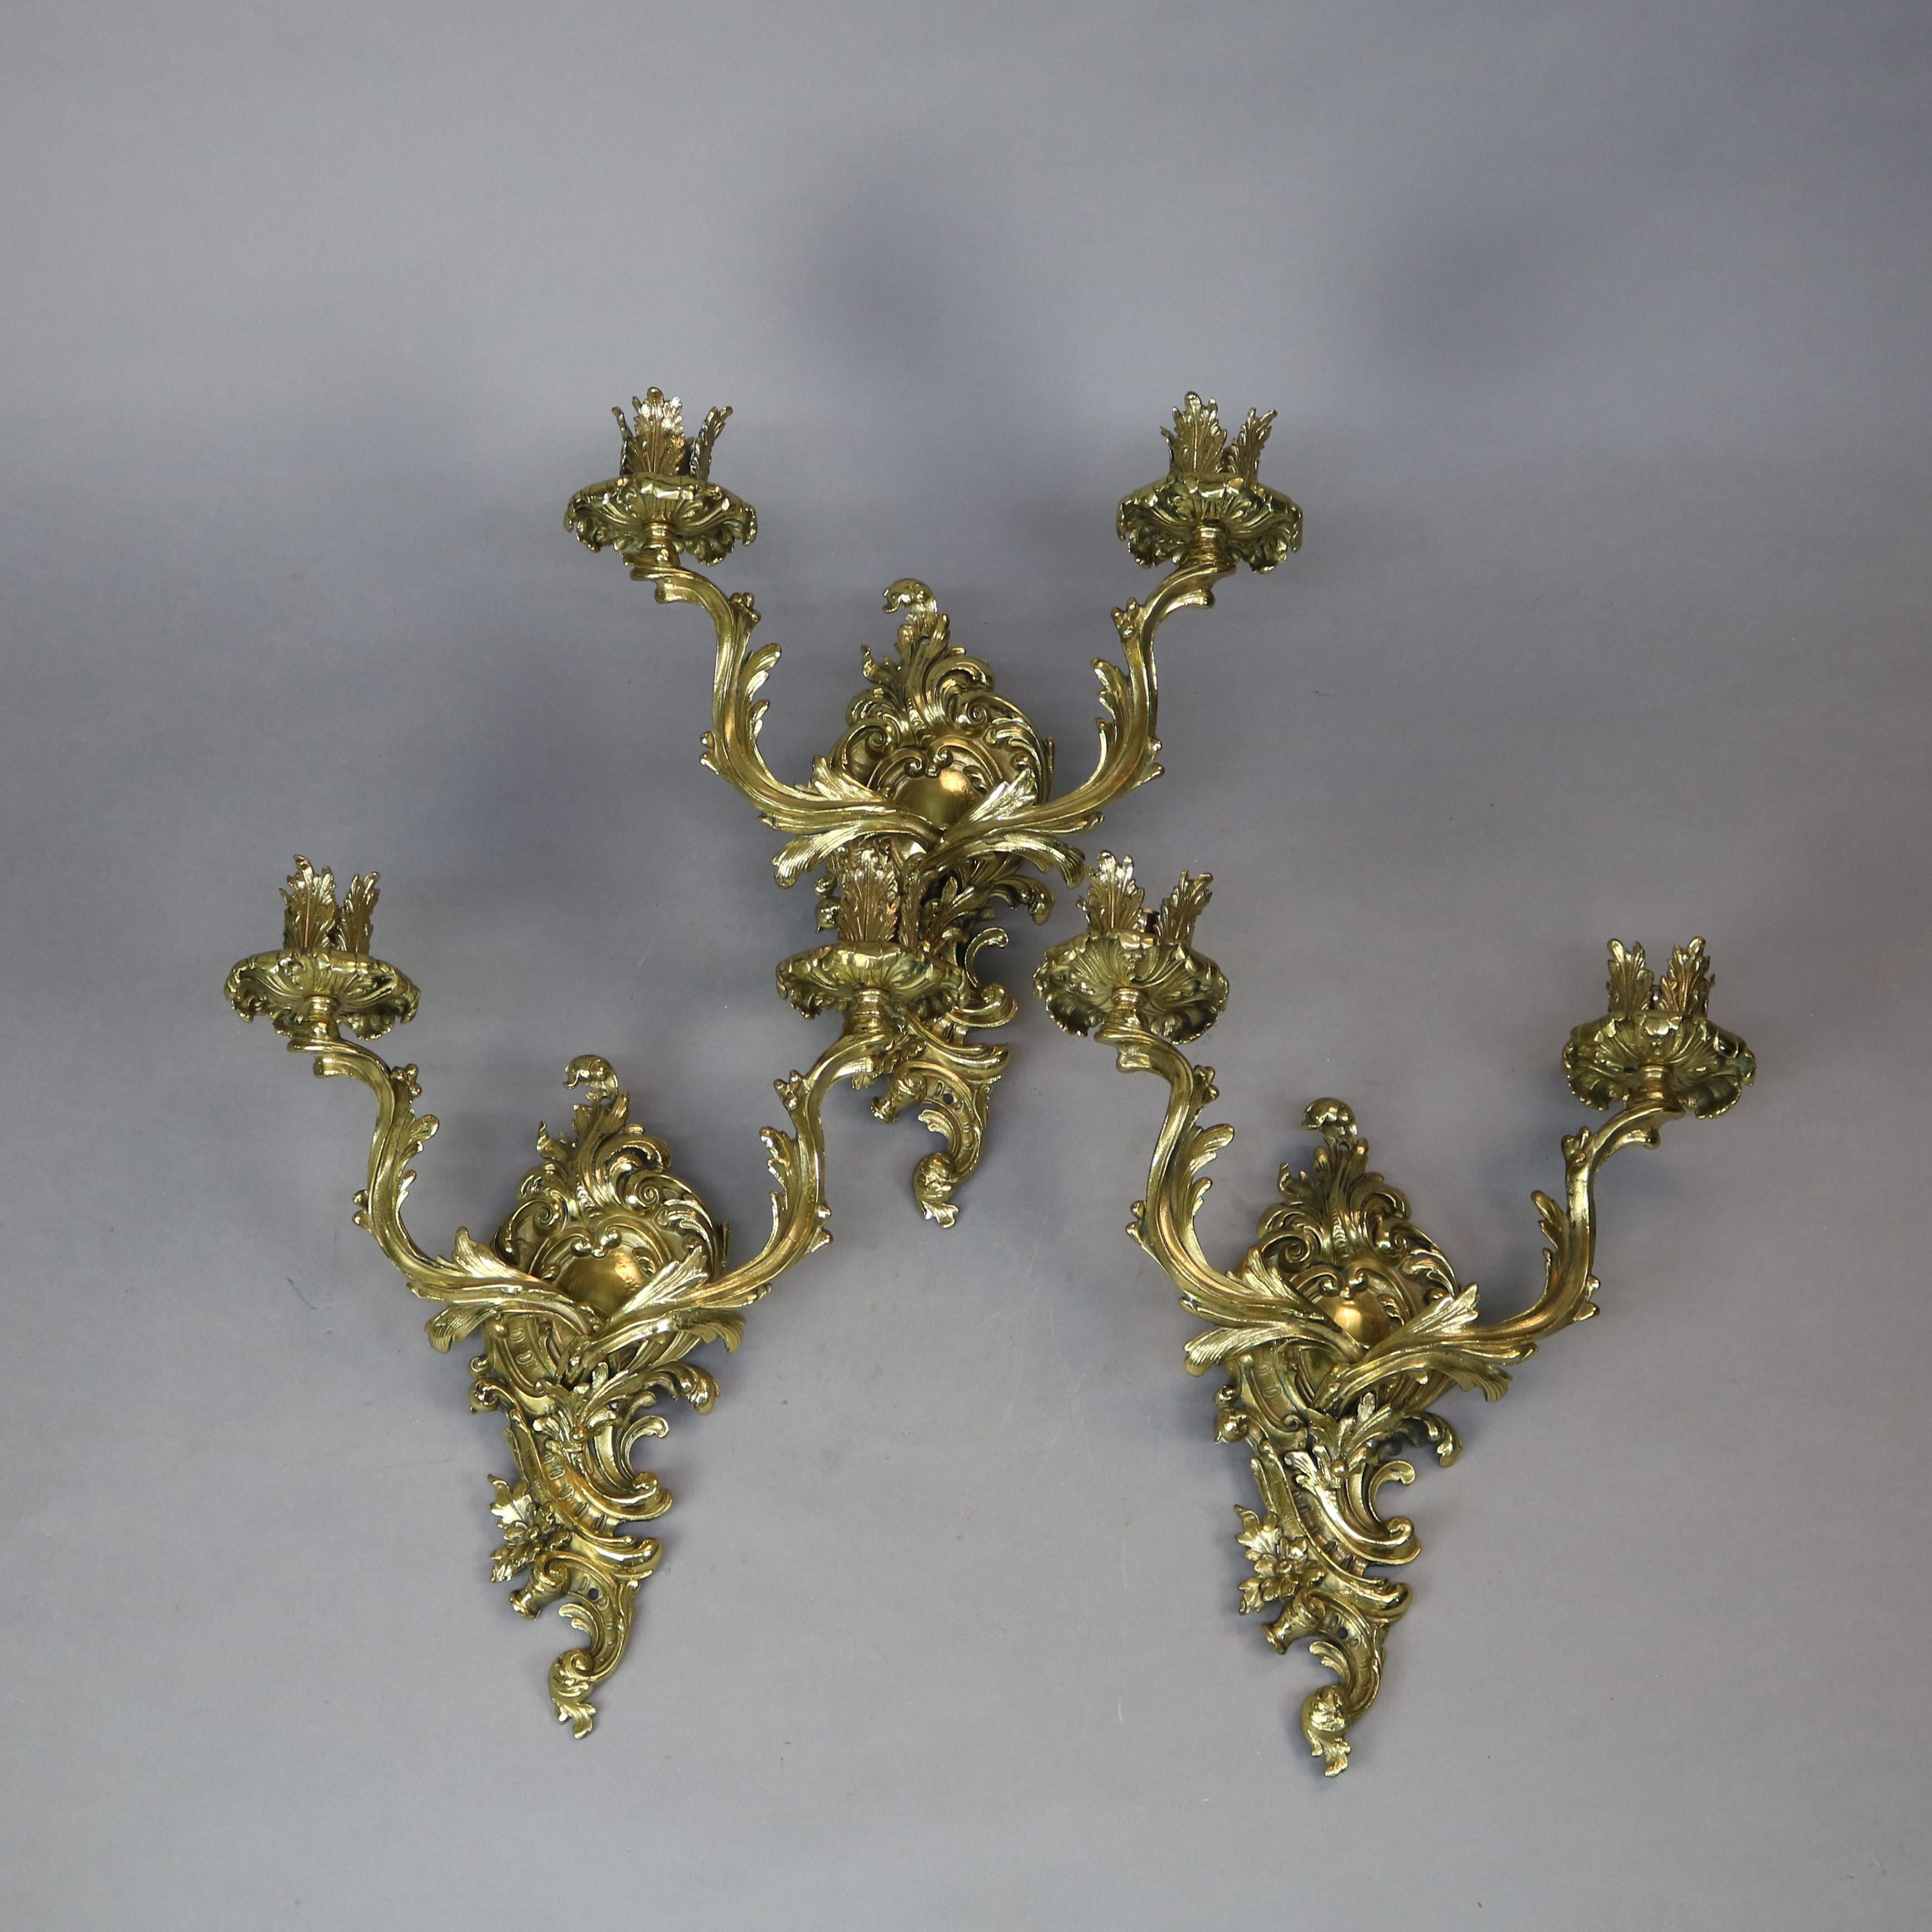 Cast Antique Early Set of French Rococo Gilt Bronze Gas Wall Sconces, Circa 1870